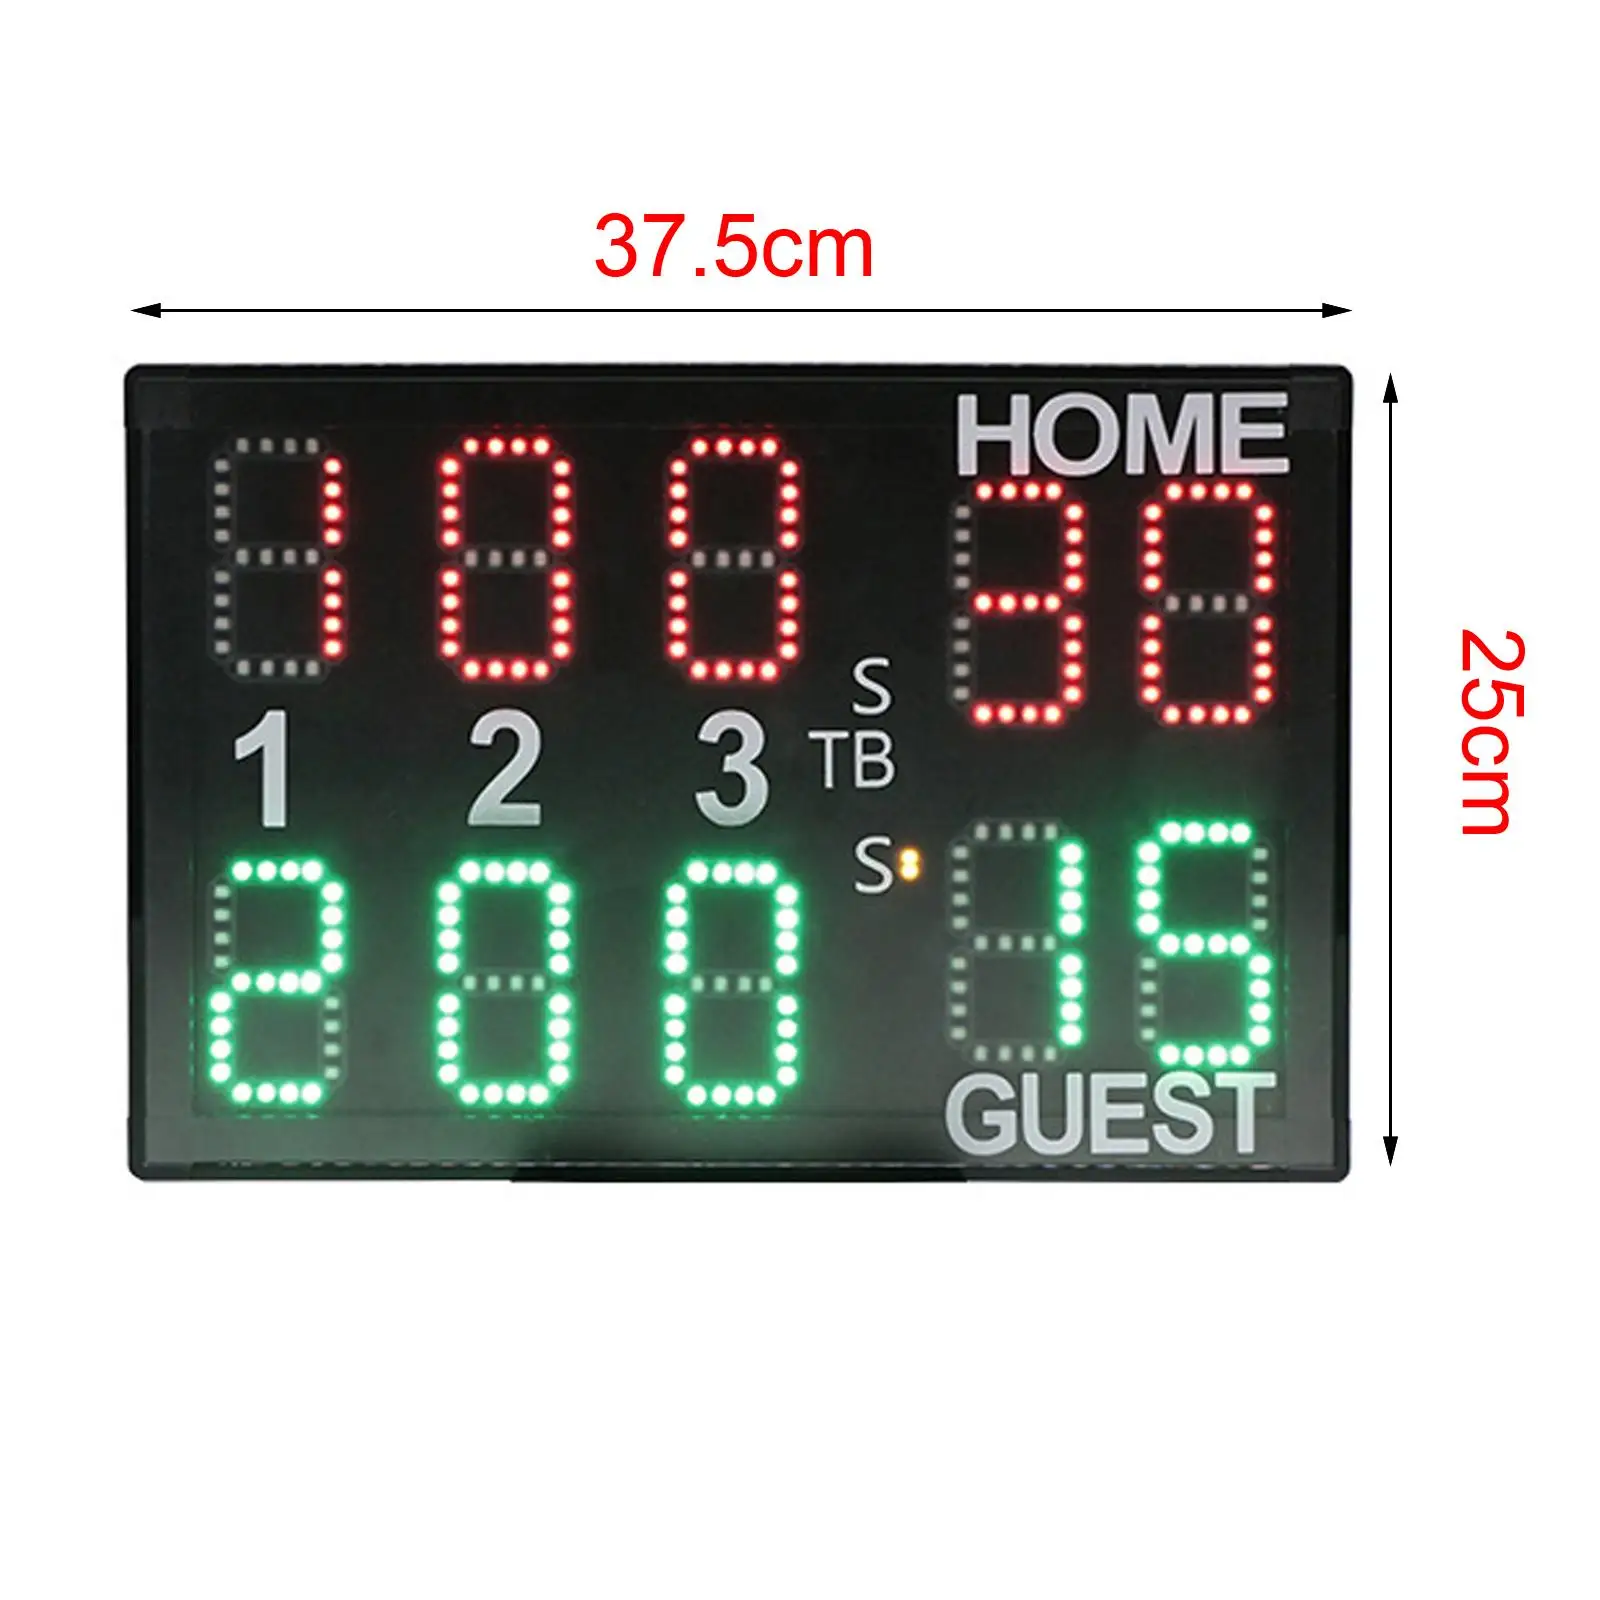 Indoor Electronic Digital Scoreboard Tennis Boxing Stopwatch Time Counting Foul Count for Basketball Volleyball Games Judo